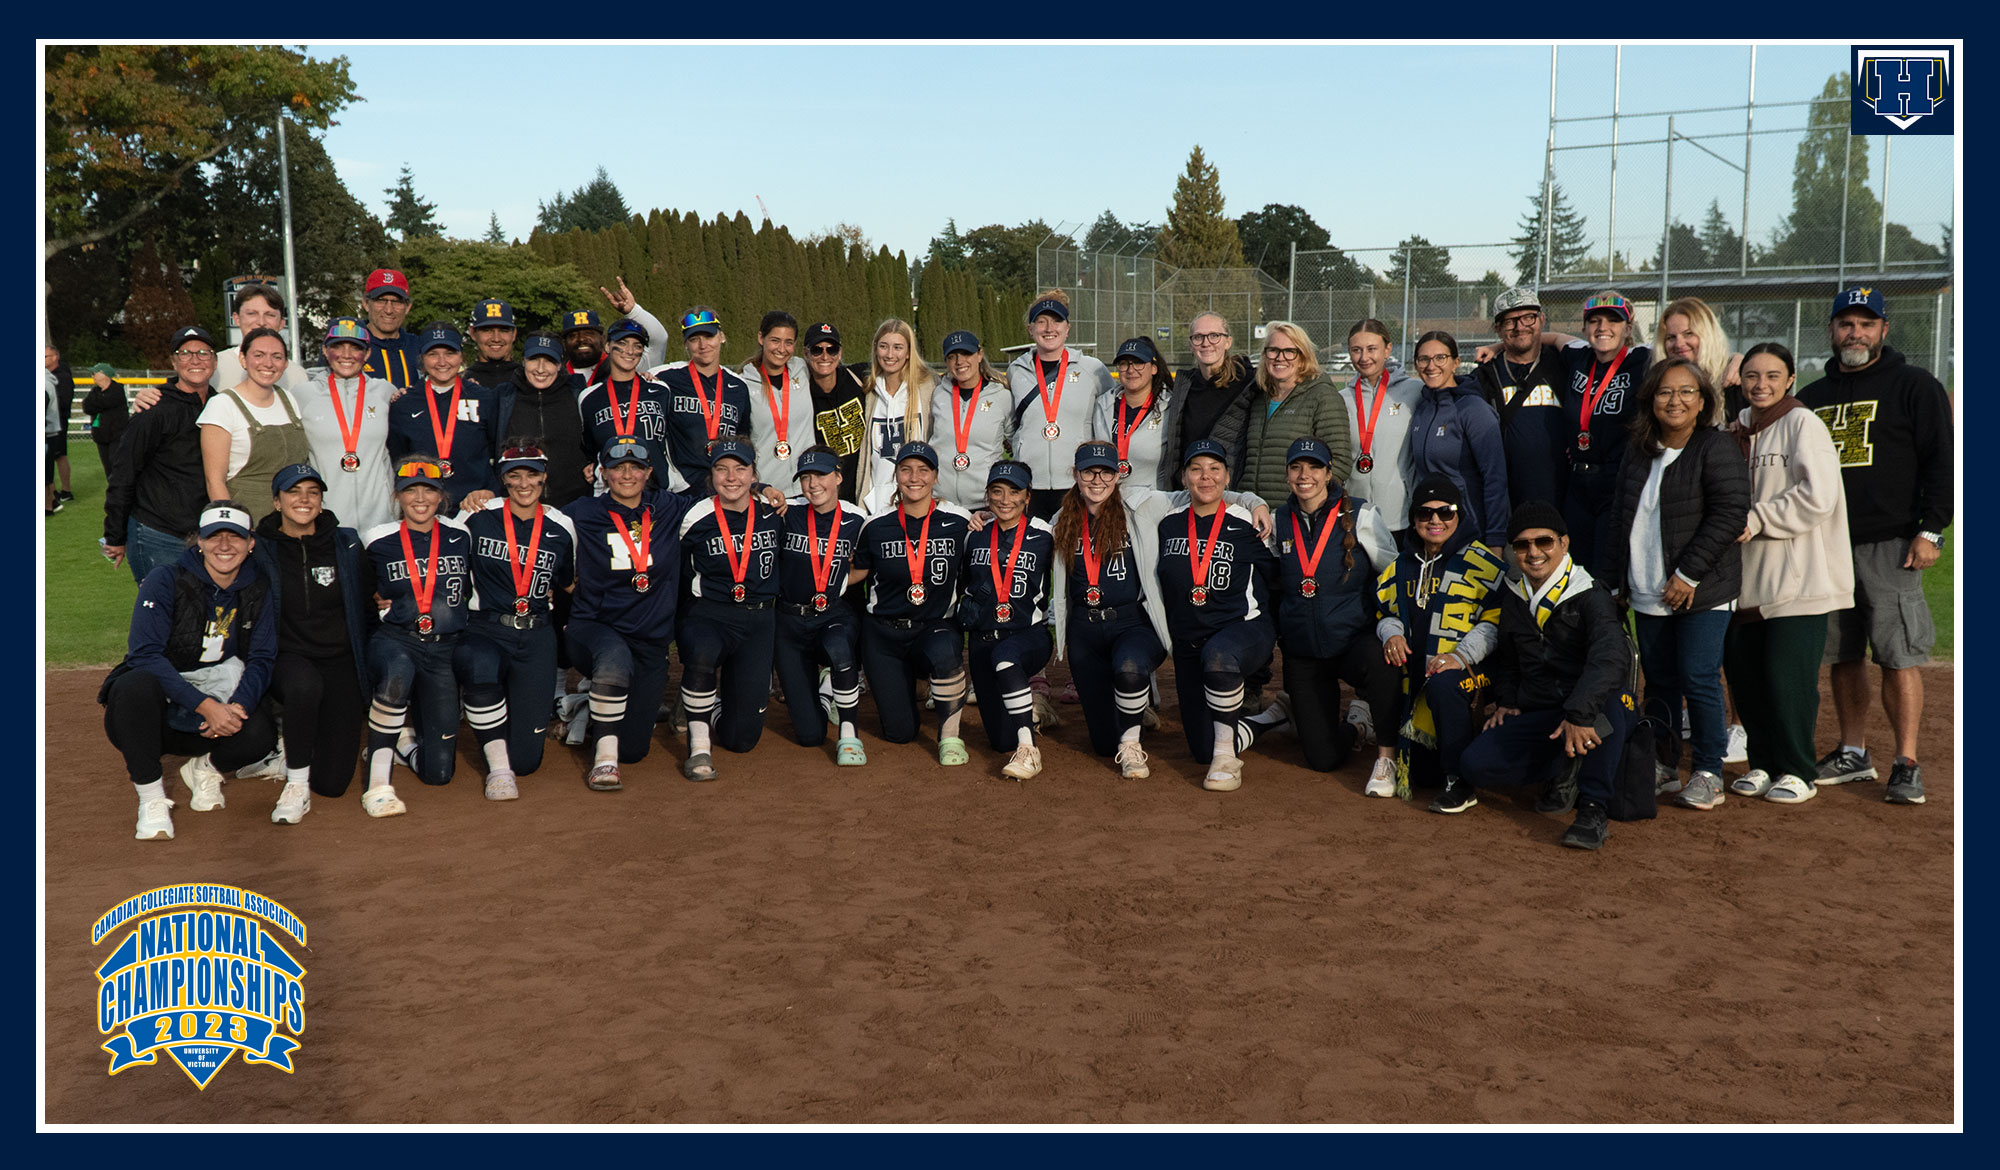 Softball team photo wearing their medals, surrounded by family and friends